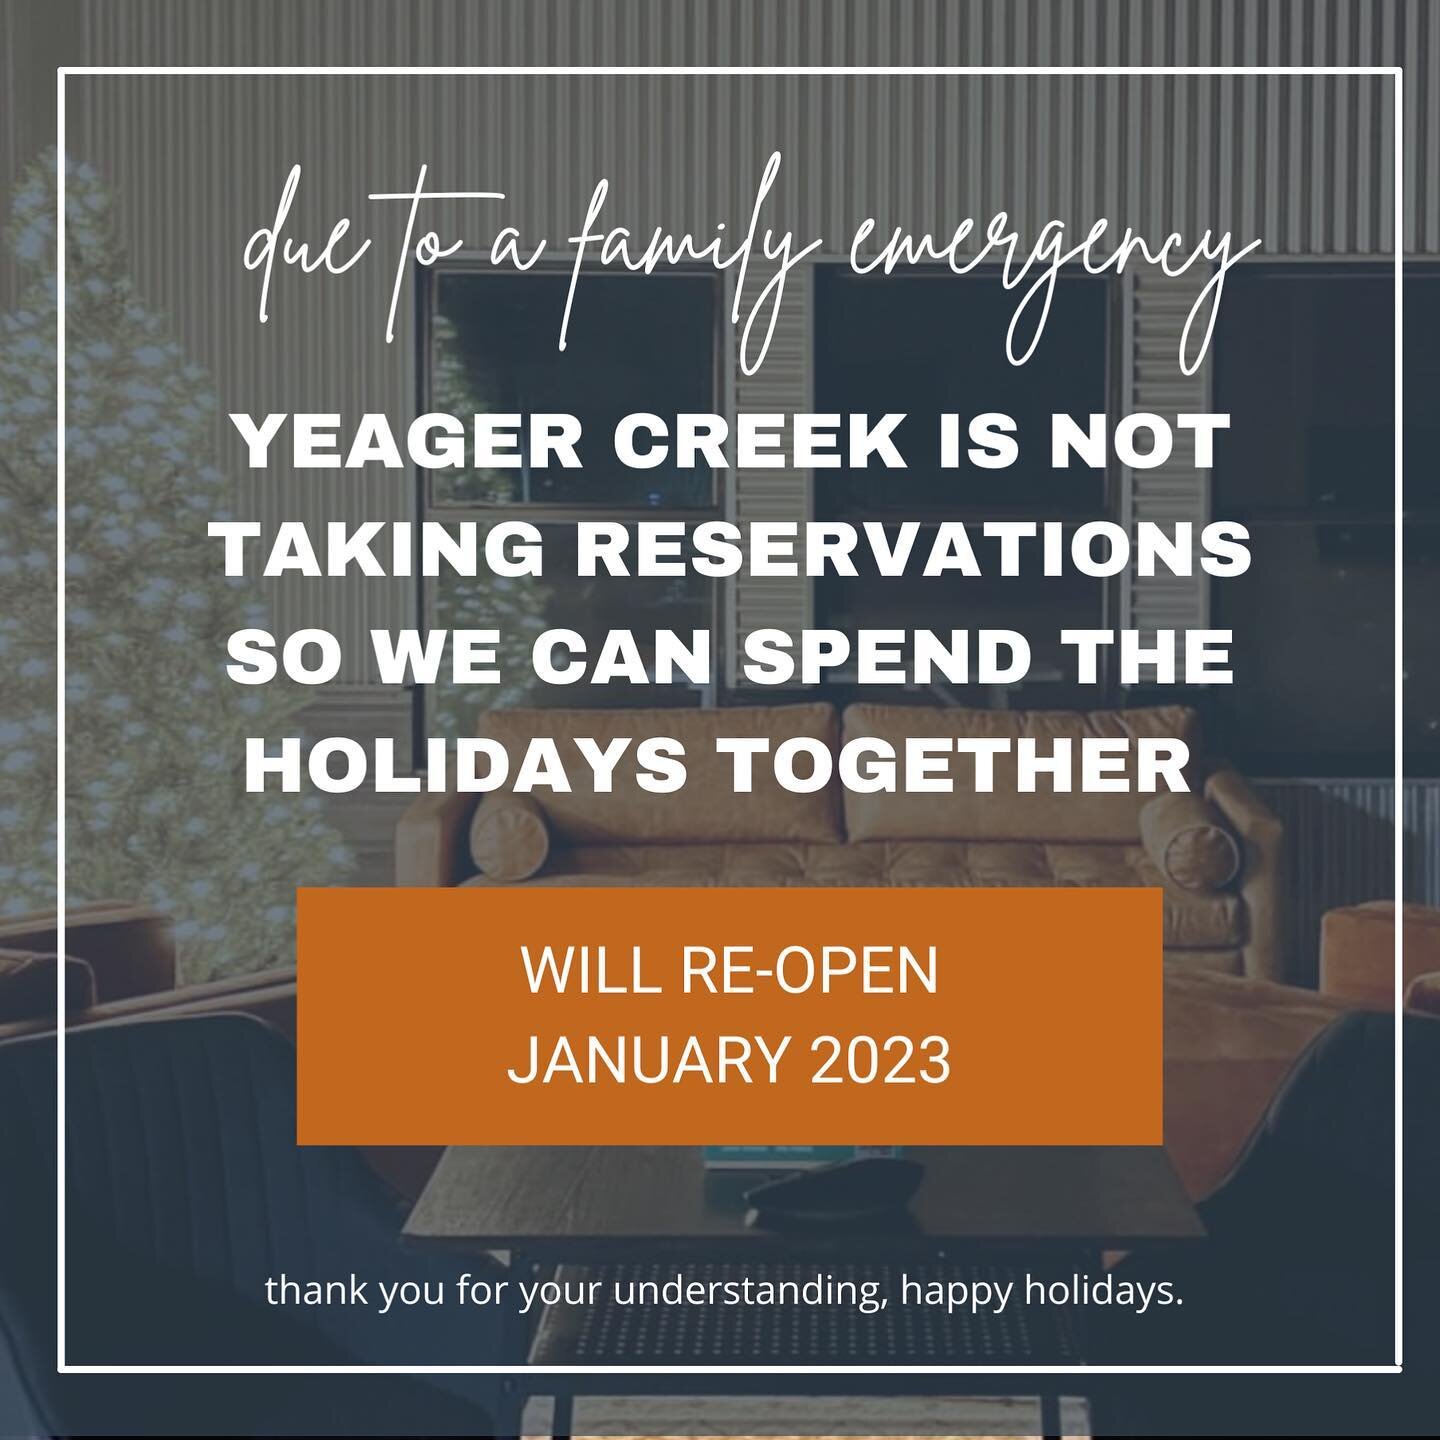 Due to a family emergency Yeager Creek RV Park is temporarily closed and not taking new reservations. If you are looking to stay with us, bookings will resume January 2023. Please refrain from calling as we are taking time to be together as a family 